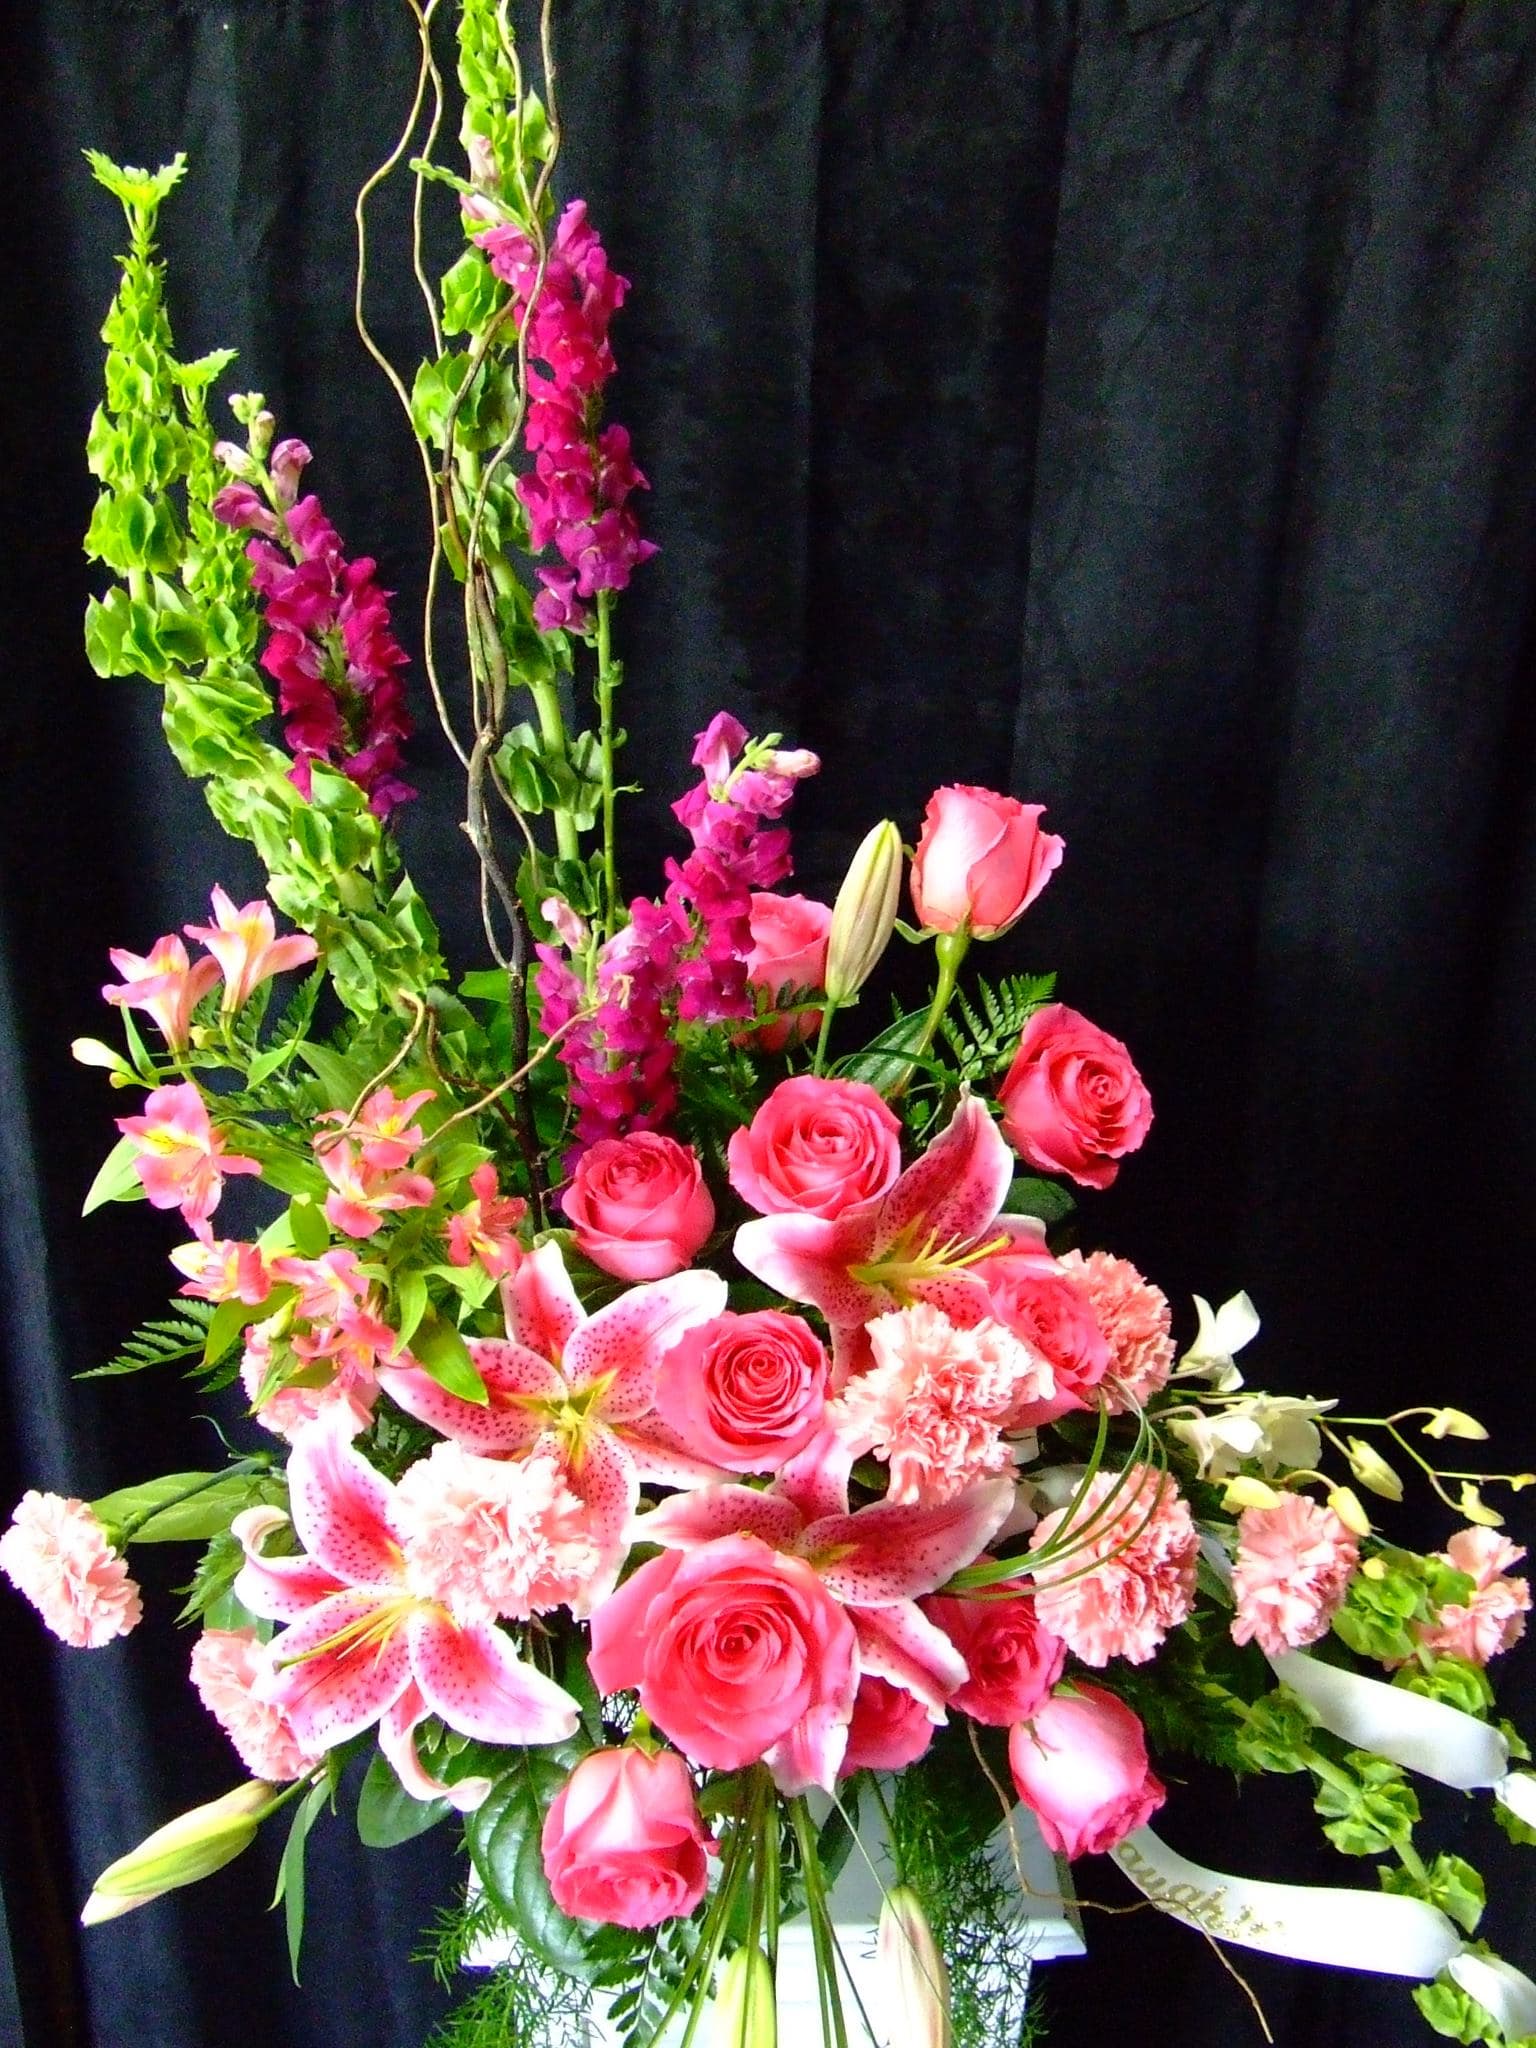 Pink Remembrance - pink roses, lilies, Snap Dragons, Bells of Ireland, Alstromeria,  carnations